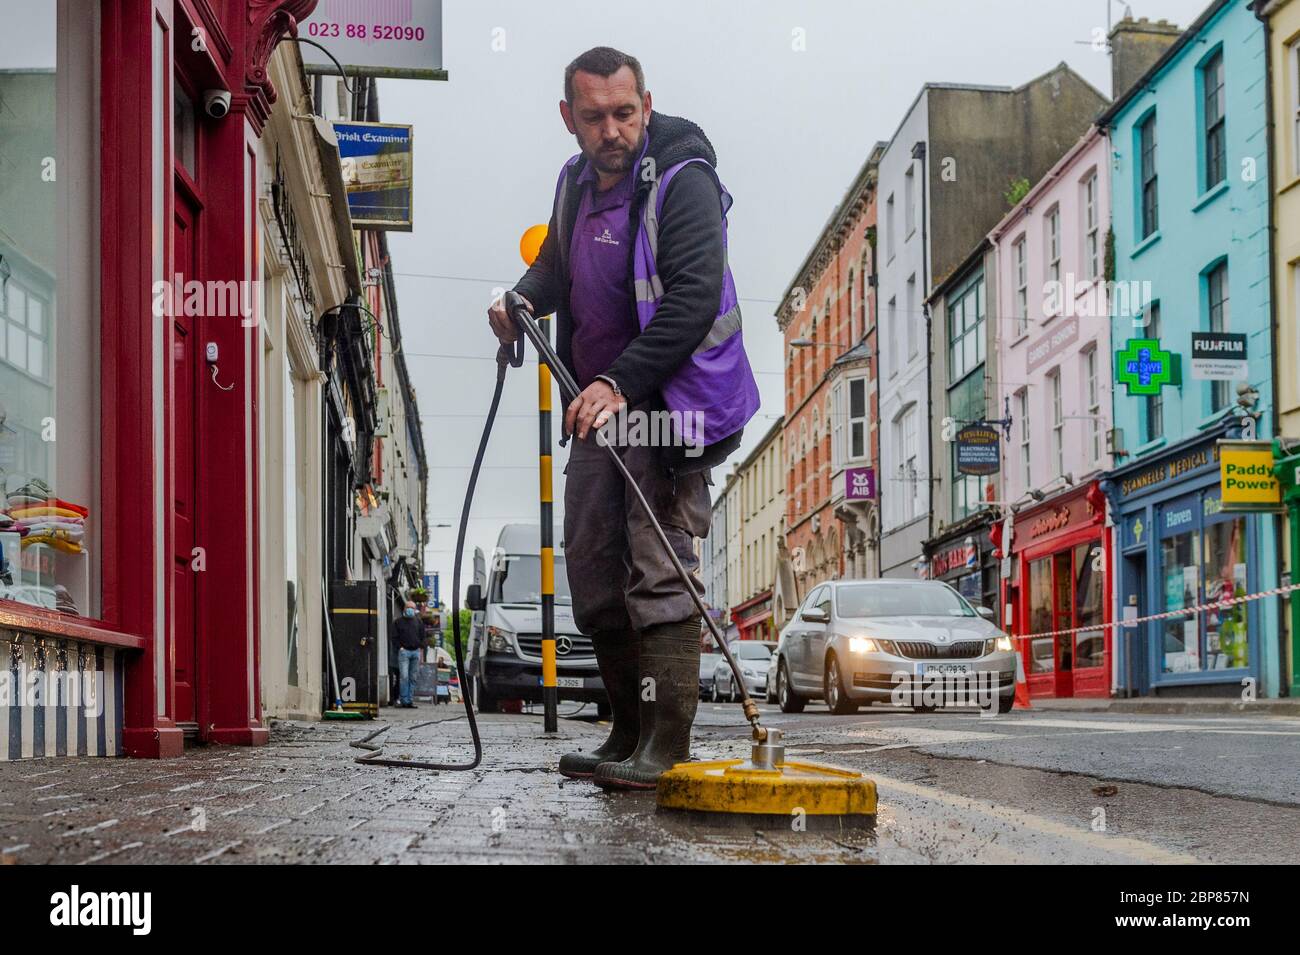 Bandon, West Cork, Ireland. 18th May, 2020. Bandon had its main street deep cleaned this morning, as part of the 'return to business' phase of exiting the Covid-19 lockdown, Soft Clean Group was tasked with performing the task in Bandon. Marcin Urbaniak, an employee, soft cleans the street. Credit: AG News/Alamy Live News Stock Photo